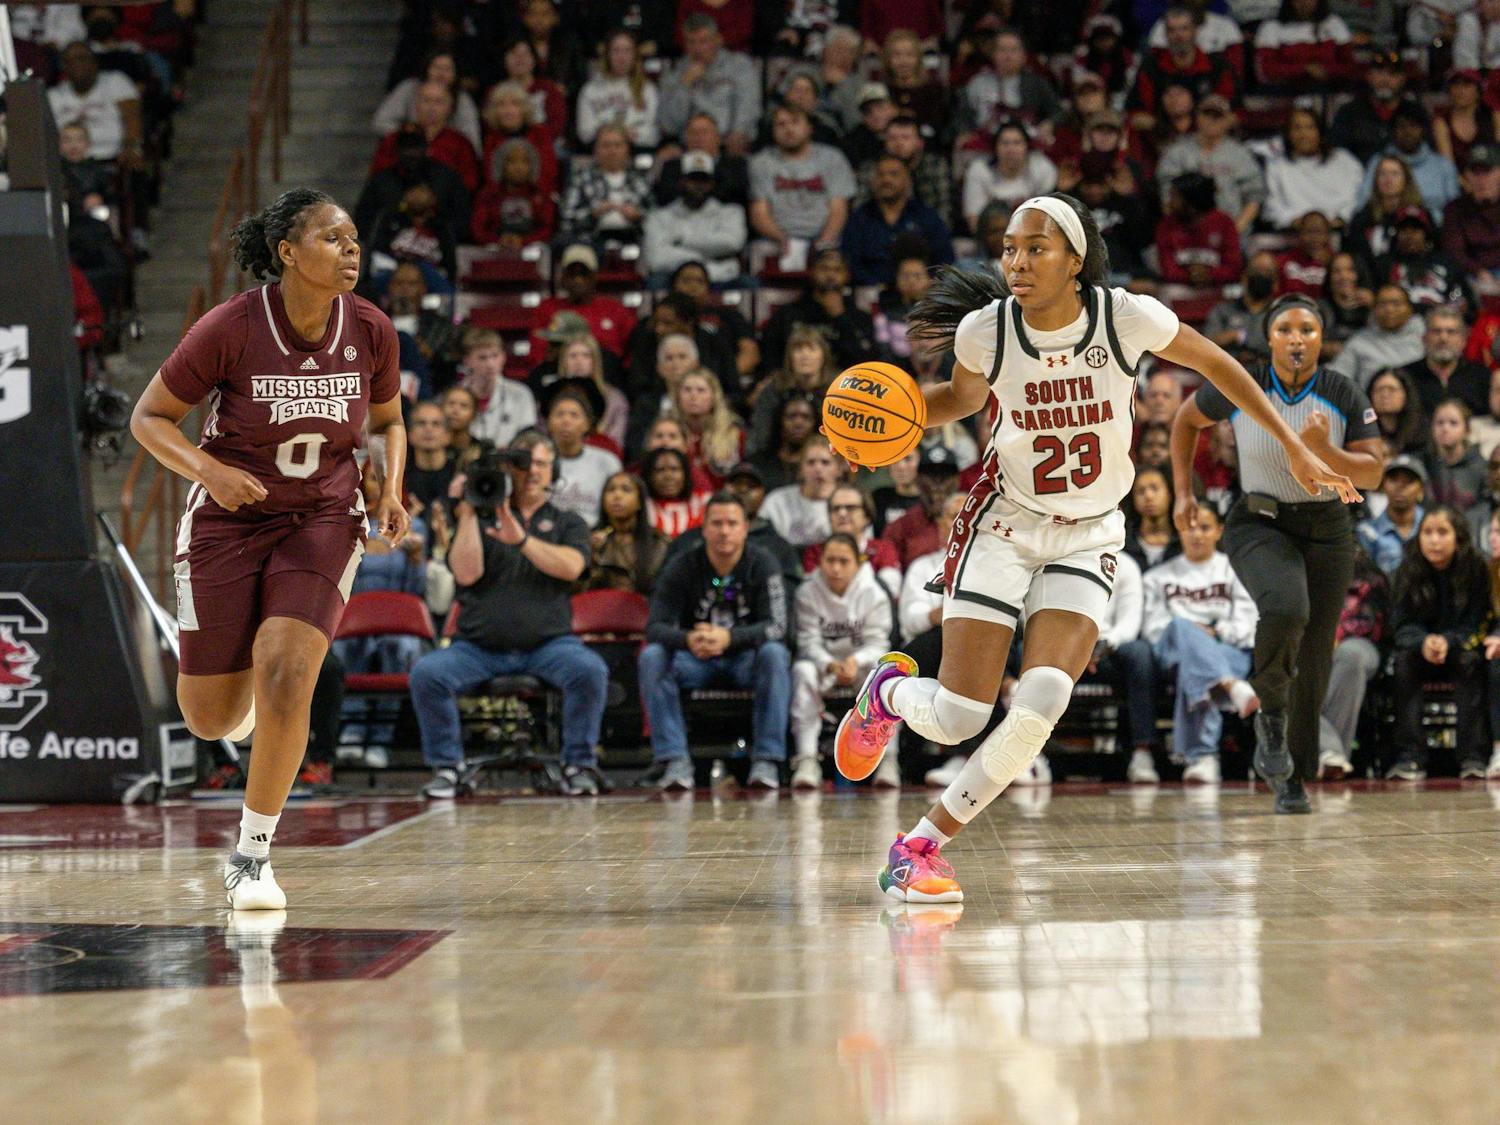 Junior Guard Bree Hall drives the ball through the court against Mississippi's defense in its SEC home opener on Jan. 7, 2024. Hall led the Gamecocks with 15 points in the 85-66 victory over Mississippi State.